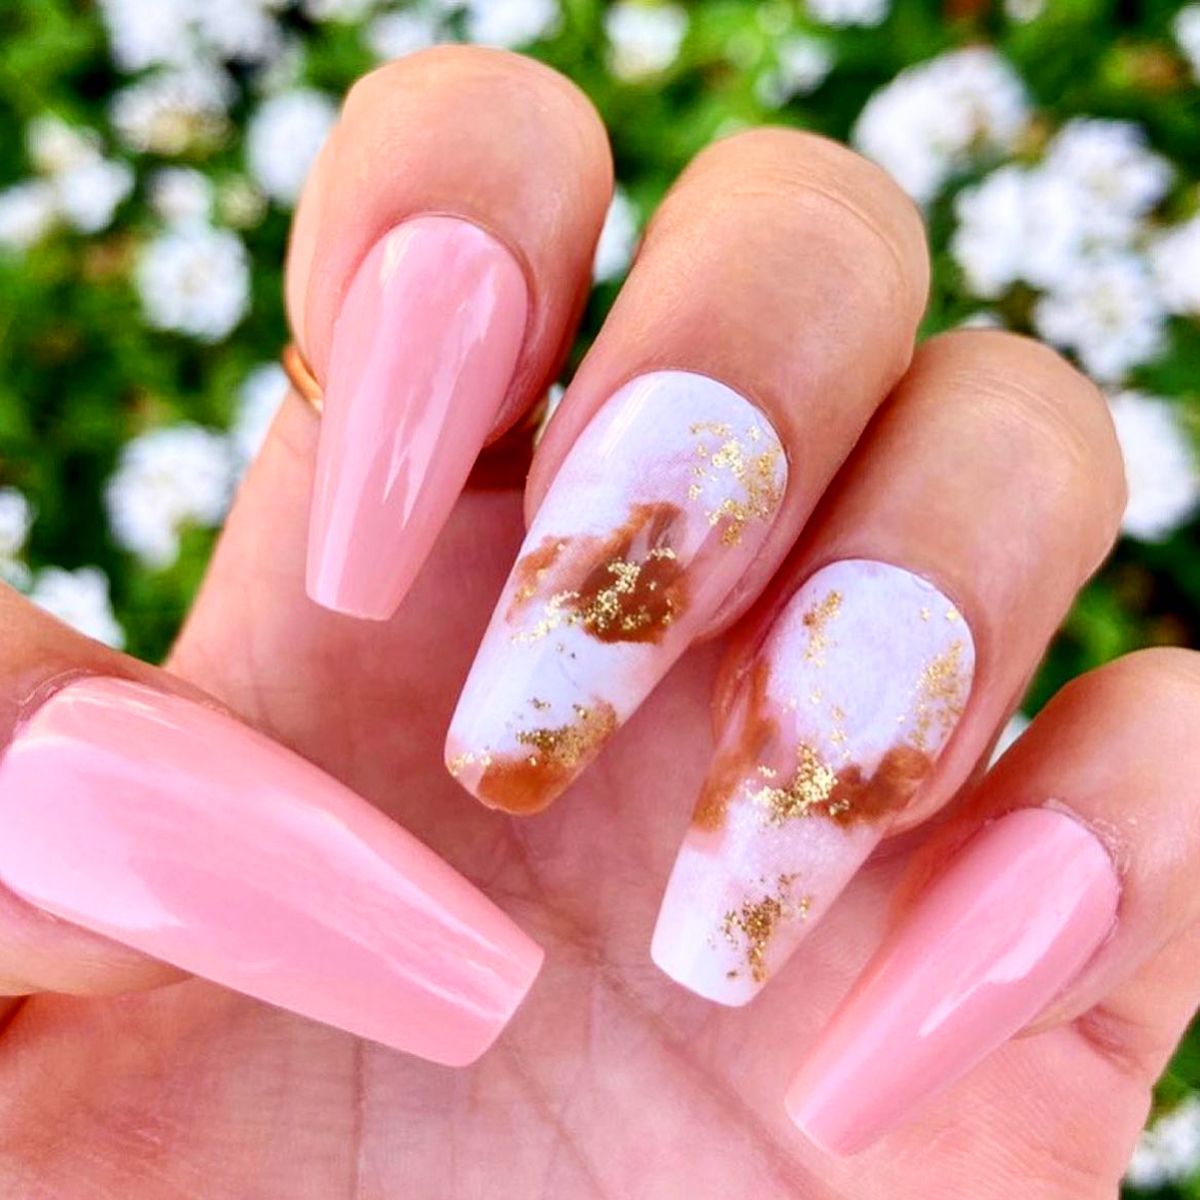 Pink Press On Nails with Glue Coffin Shaped Nails - Poshmellow